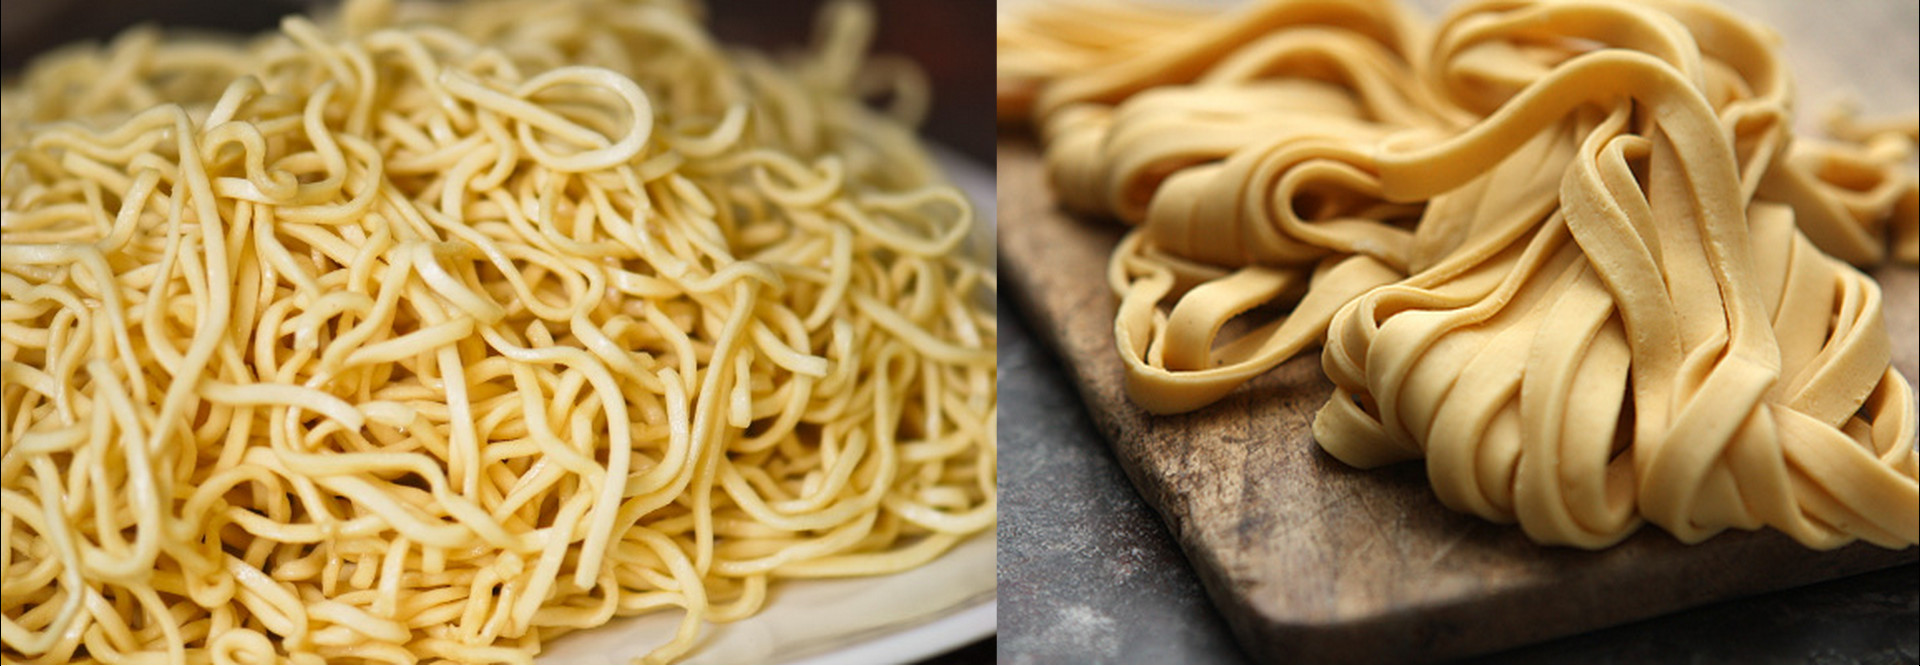 Egg Noodles Vs.pasta Beautiful 10 asian Dishes Vs 10 Western Dishes who Does It Better